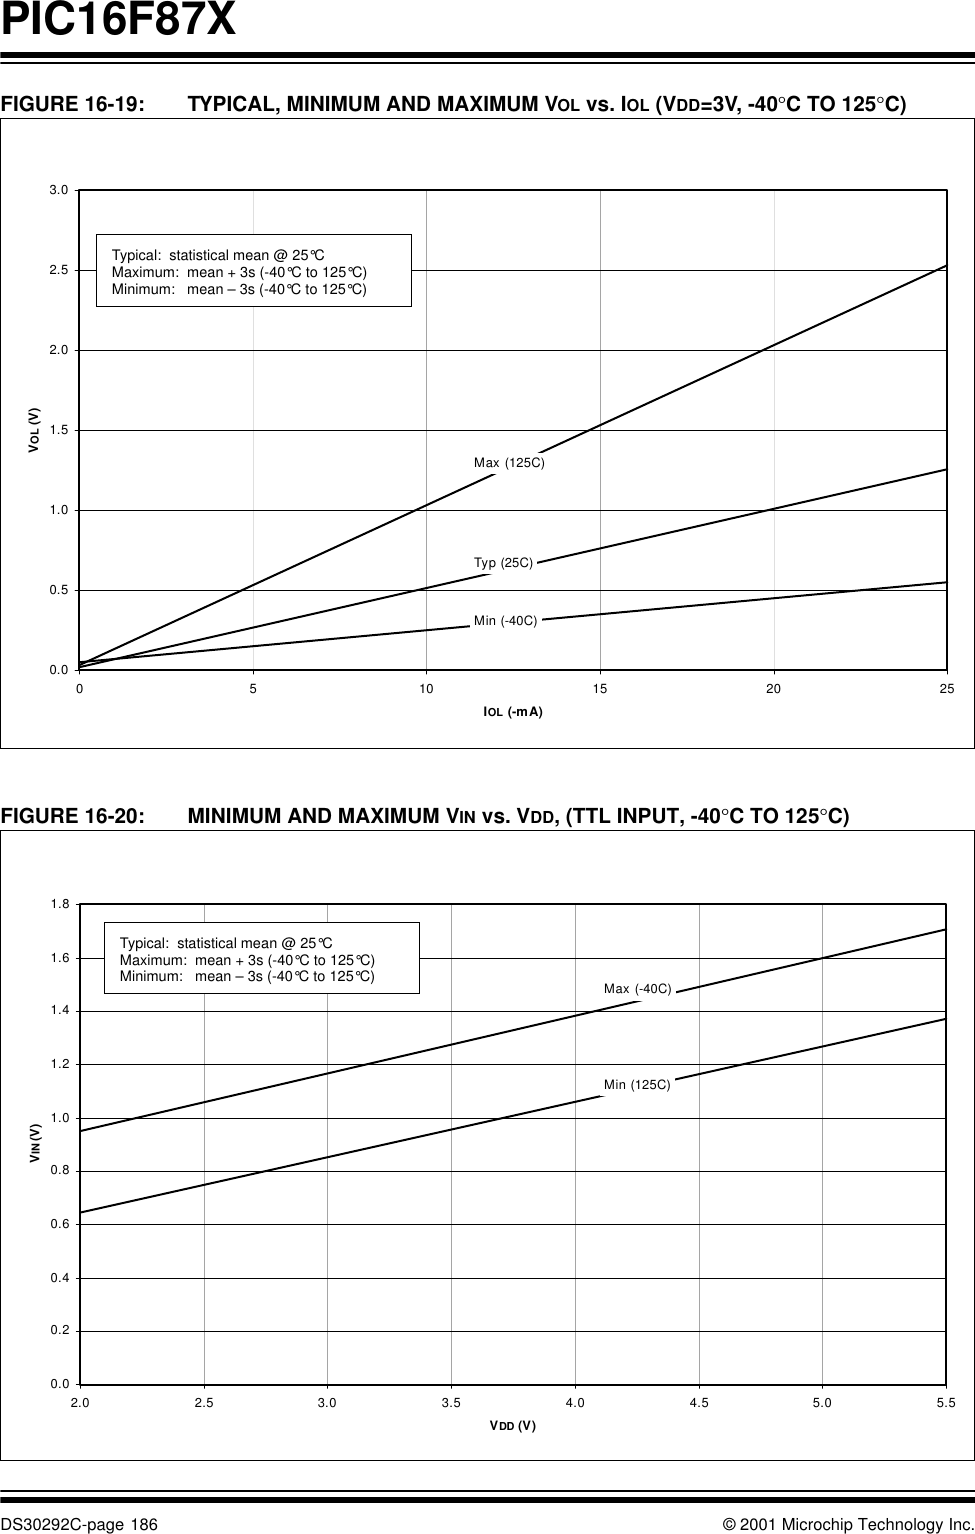 PIC16F87XDS30292C-page 186 © 2001 Microchip Technology Inc.FIGURE 16-19: TYPICAL, MINIMUM AND MAXIMUM VOL vs. IOL (VDD=3V, -40°C TO 125°C)FIGURE 16-20: MINIMUM AND MAXIMUM VIN vs. VDD, (TTL INPUT, -40°C TO 125°C) 0.00.51.01.52.02.53.00 5 10 15 20 25IOL (-mA)VOL (V)Max (125C)Typ (25C)Min (-40C)Typical:  statistical mean @ 25°CMaximum:  mean + 3s (-40°C to 125°C) Minimum:   mean – 3s (-40°C to 125°C)0.00.20.40.60.81.01.21.41.61.82.0 2.5 3.0 3.5 4.0 4.5 5.0 5.5VDD (V)VIN (V)Max (-40C)Min (125C)Typical:  statistical mean @ 25°CMaximum:  mean + 3s (-40°C to 125°C) Minimum:   mean – 3s (-40°C to 125°C)